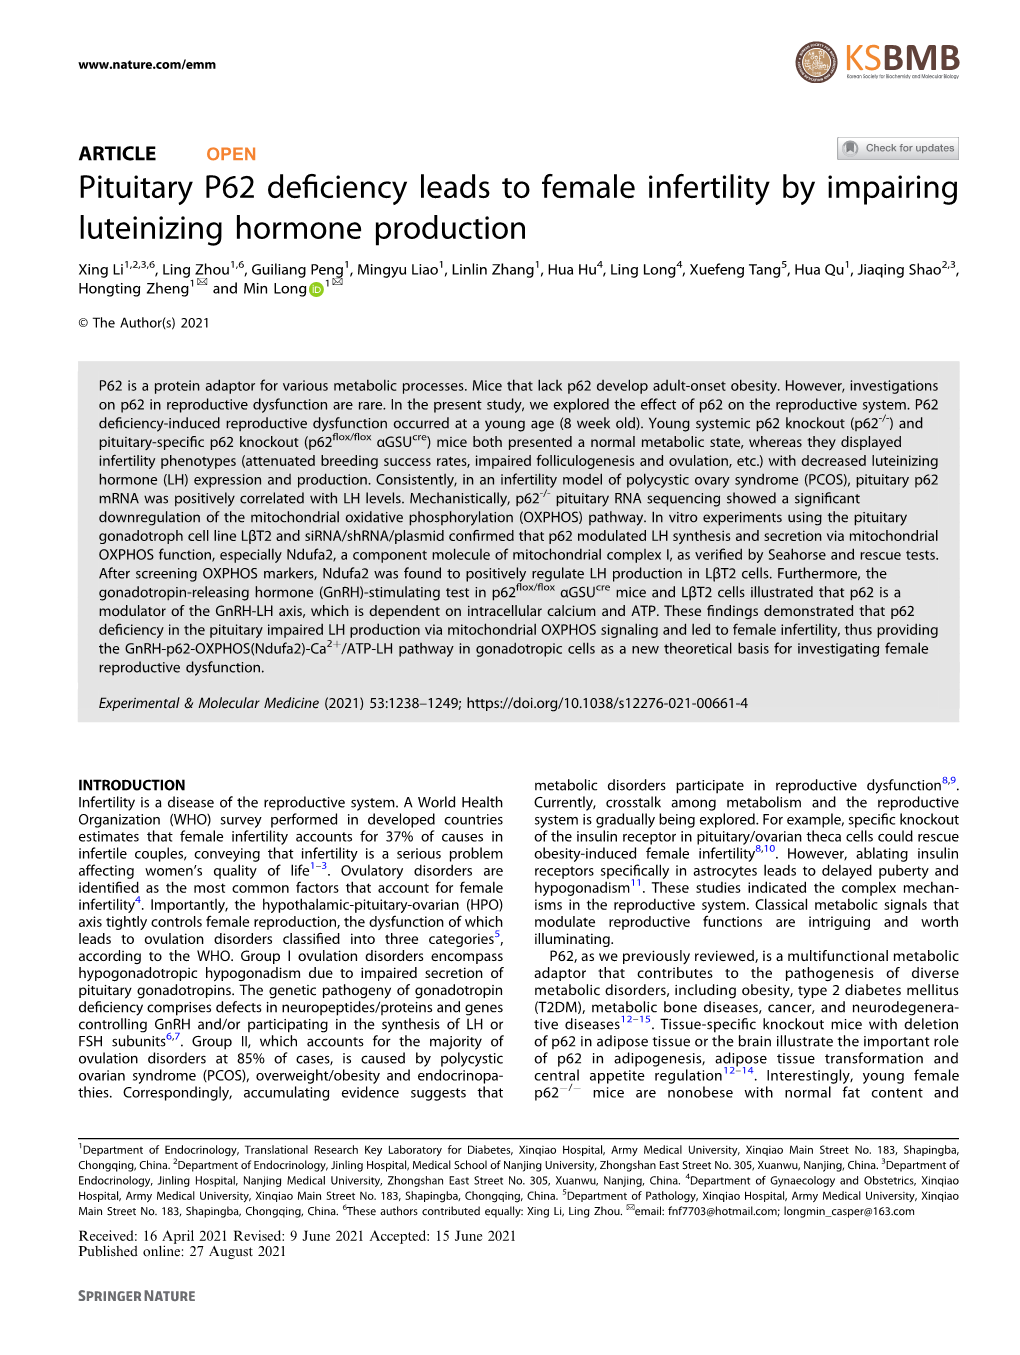 Pituitary P62 Deficiency Leads to Female Infertility by Impairing Luteinizing Hormone Production